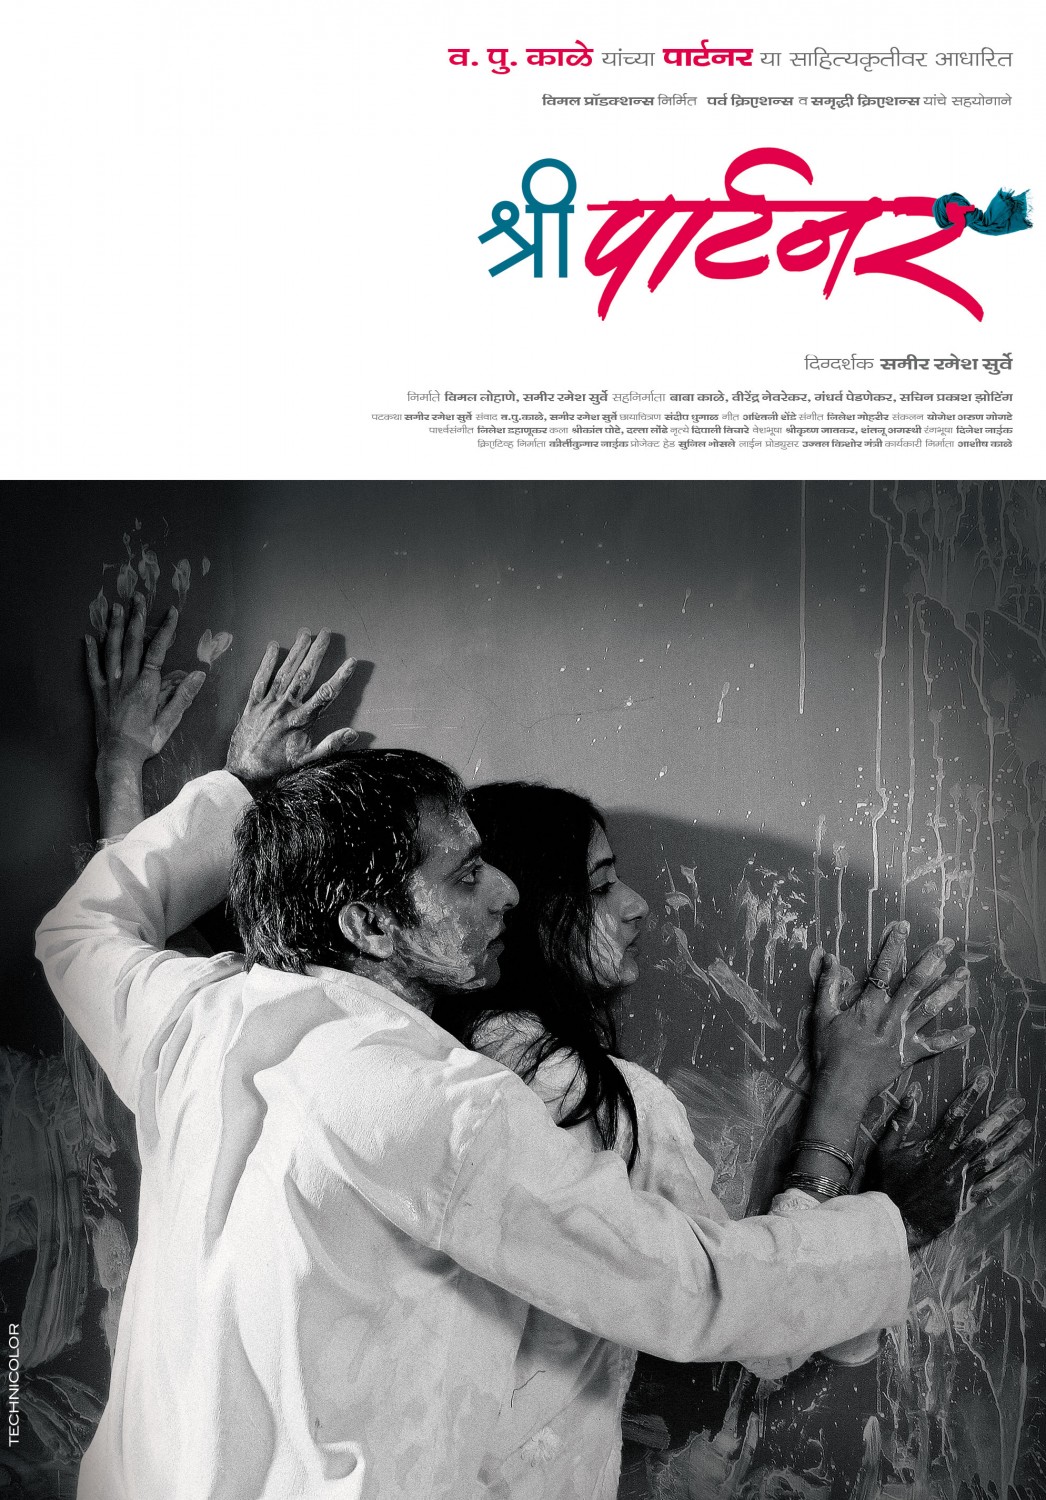 Extra Large Movie Poster Image for Shree Partner (#4 of 11)